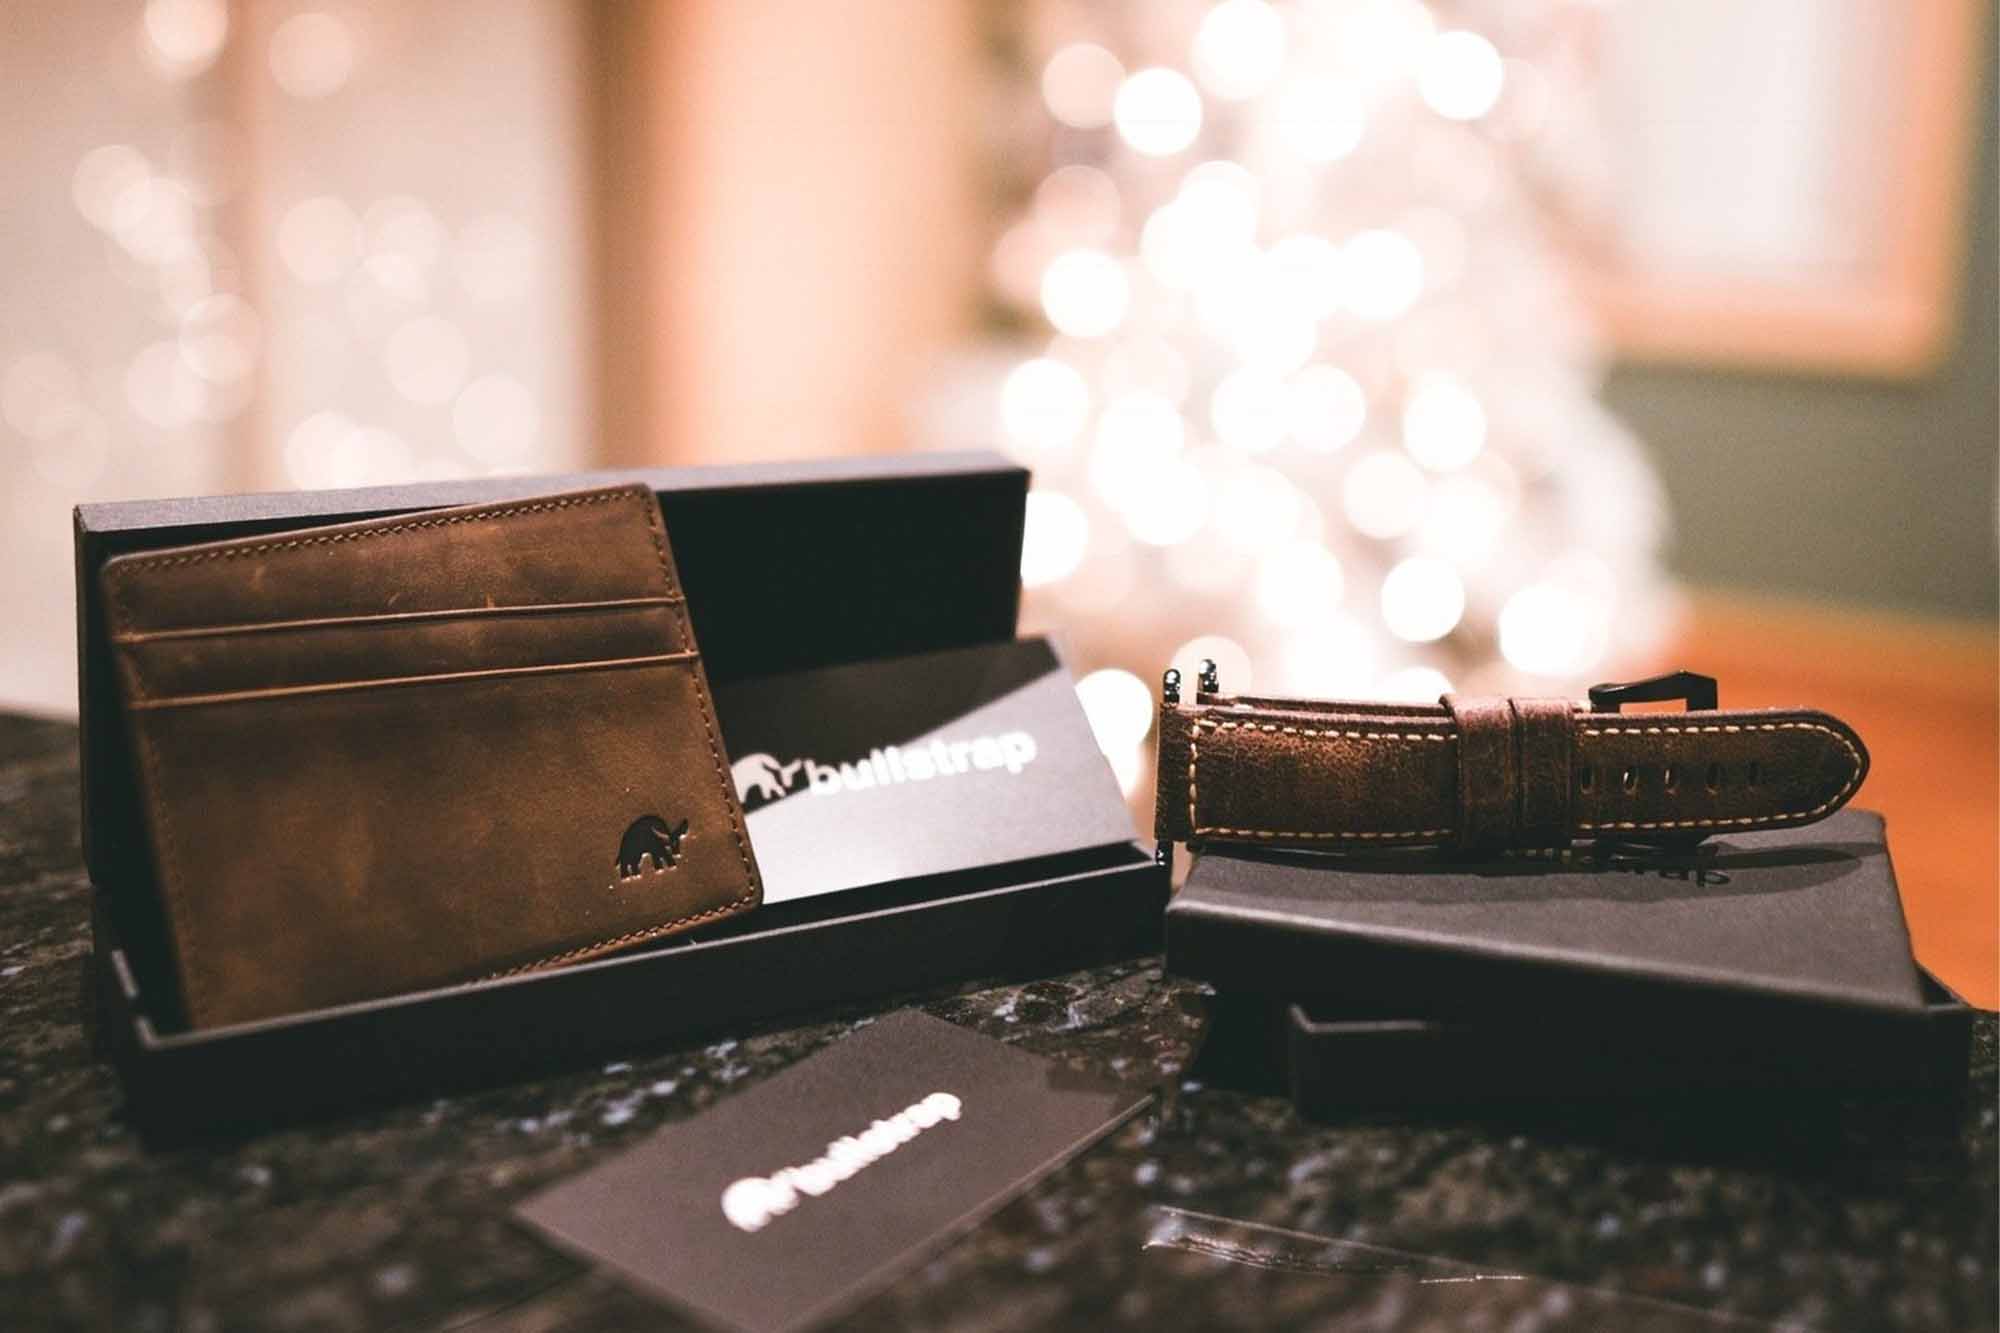 A Bullstrap leather Apple Watch band, leather wallet, and gift cards in focus with a lit Christmas tree in the background.